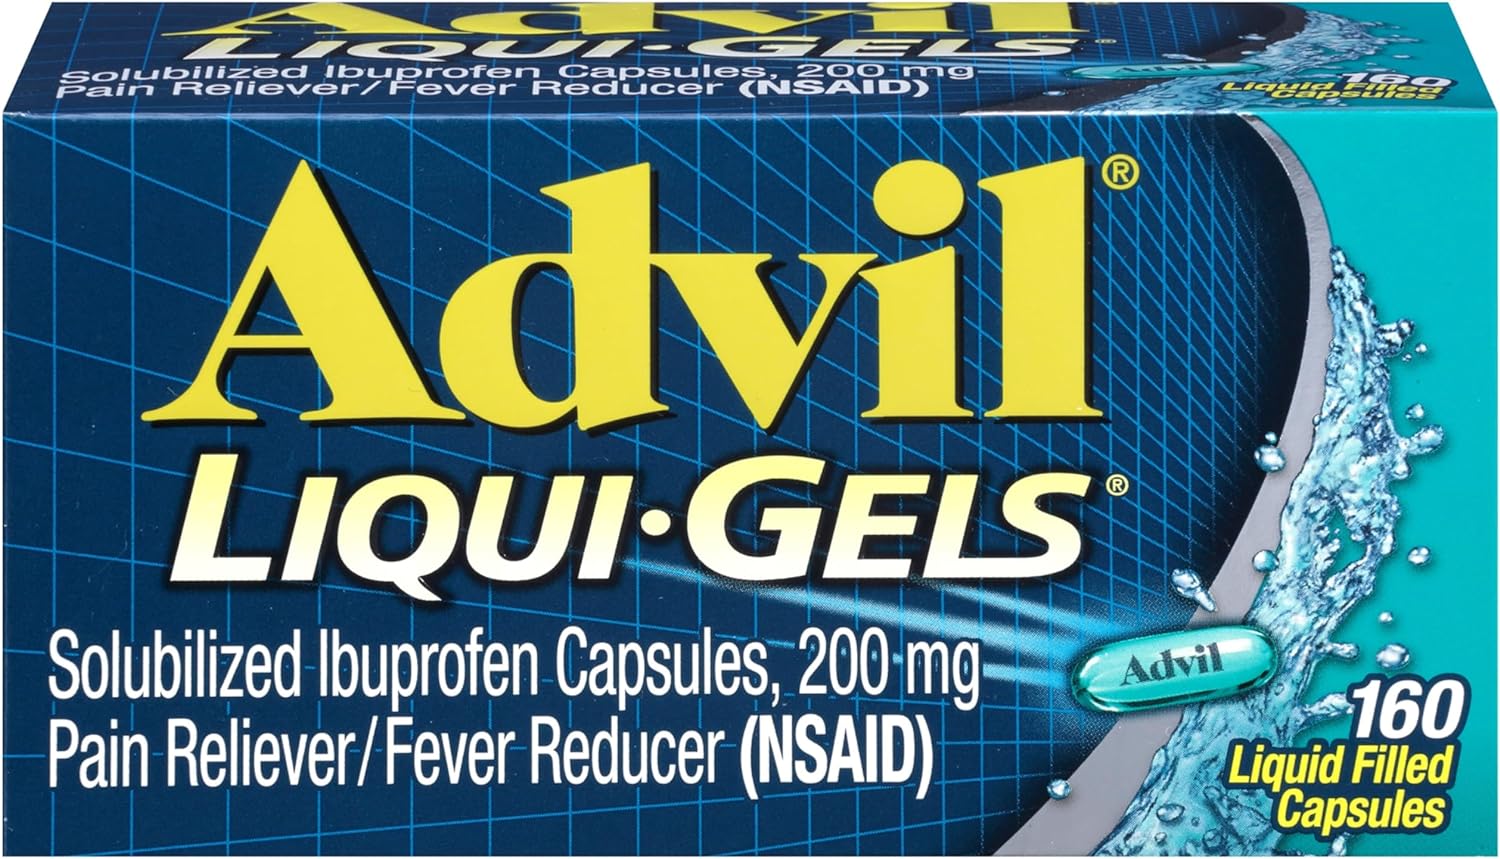 Advil Liqui-Gels Pain Reliever and Fever Reducer, Pain Medicine for Adults with Ibuprofen 200mg for Headache, Backache, Menstrual Pain and Joint Pain Relief - 160 Liquid Filled Capsules